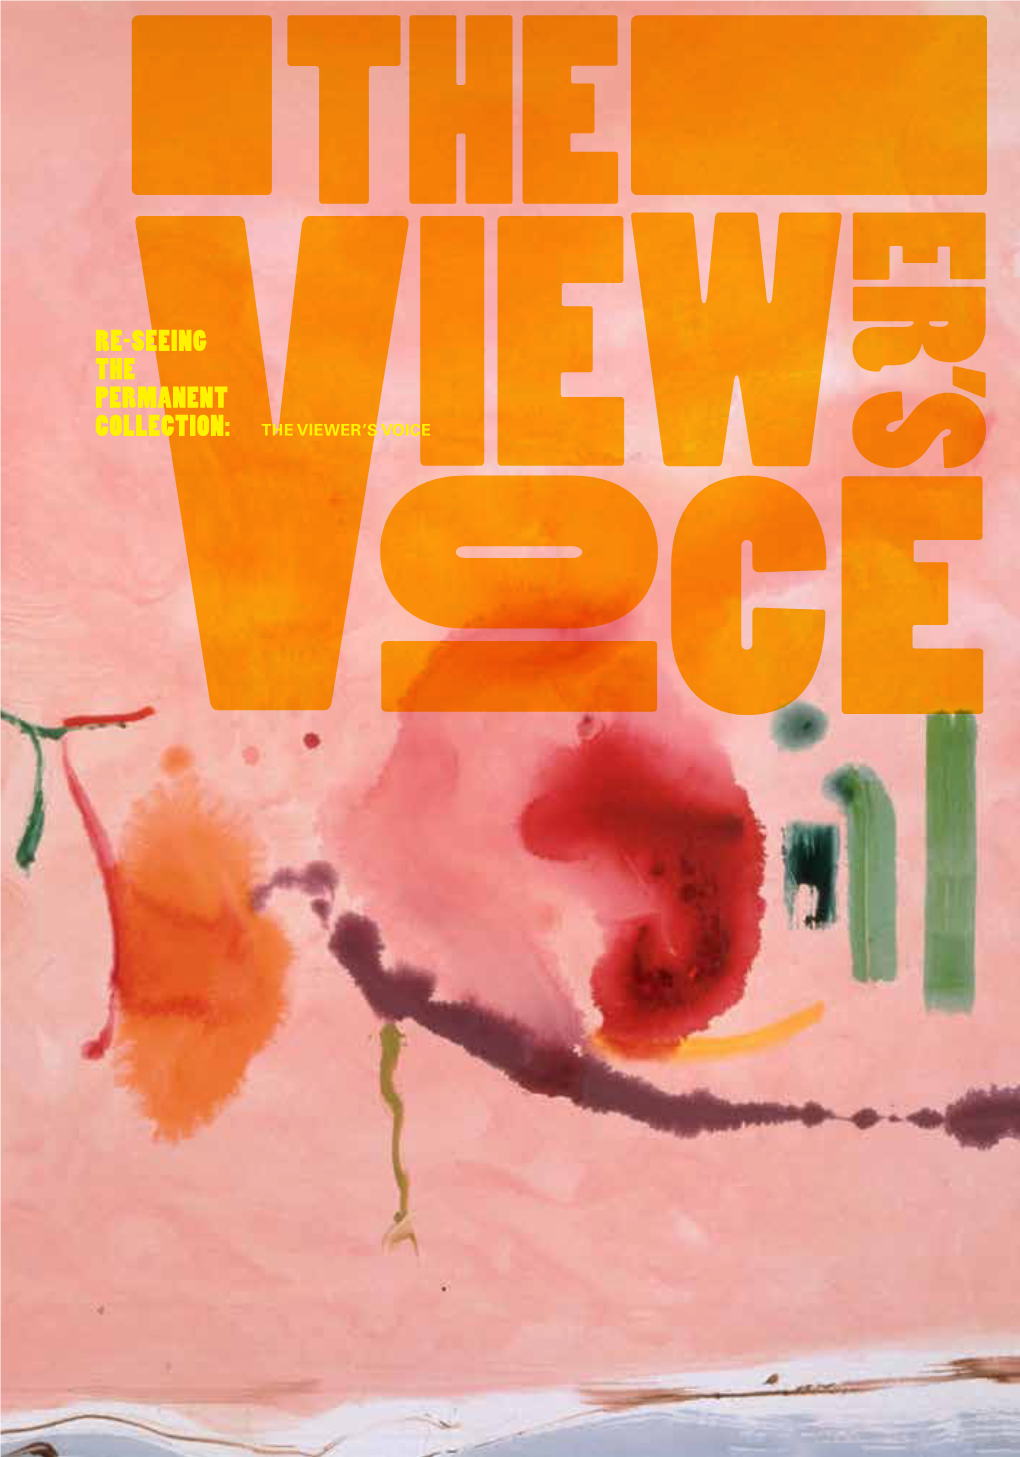 Re-Seeing the Permanent Collection: the VIEWER’S VOICE